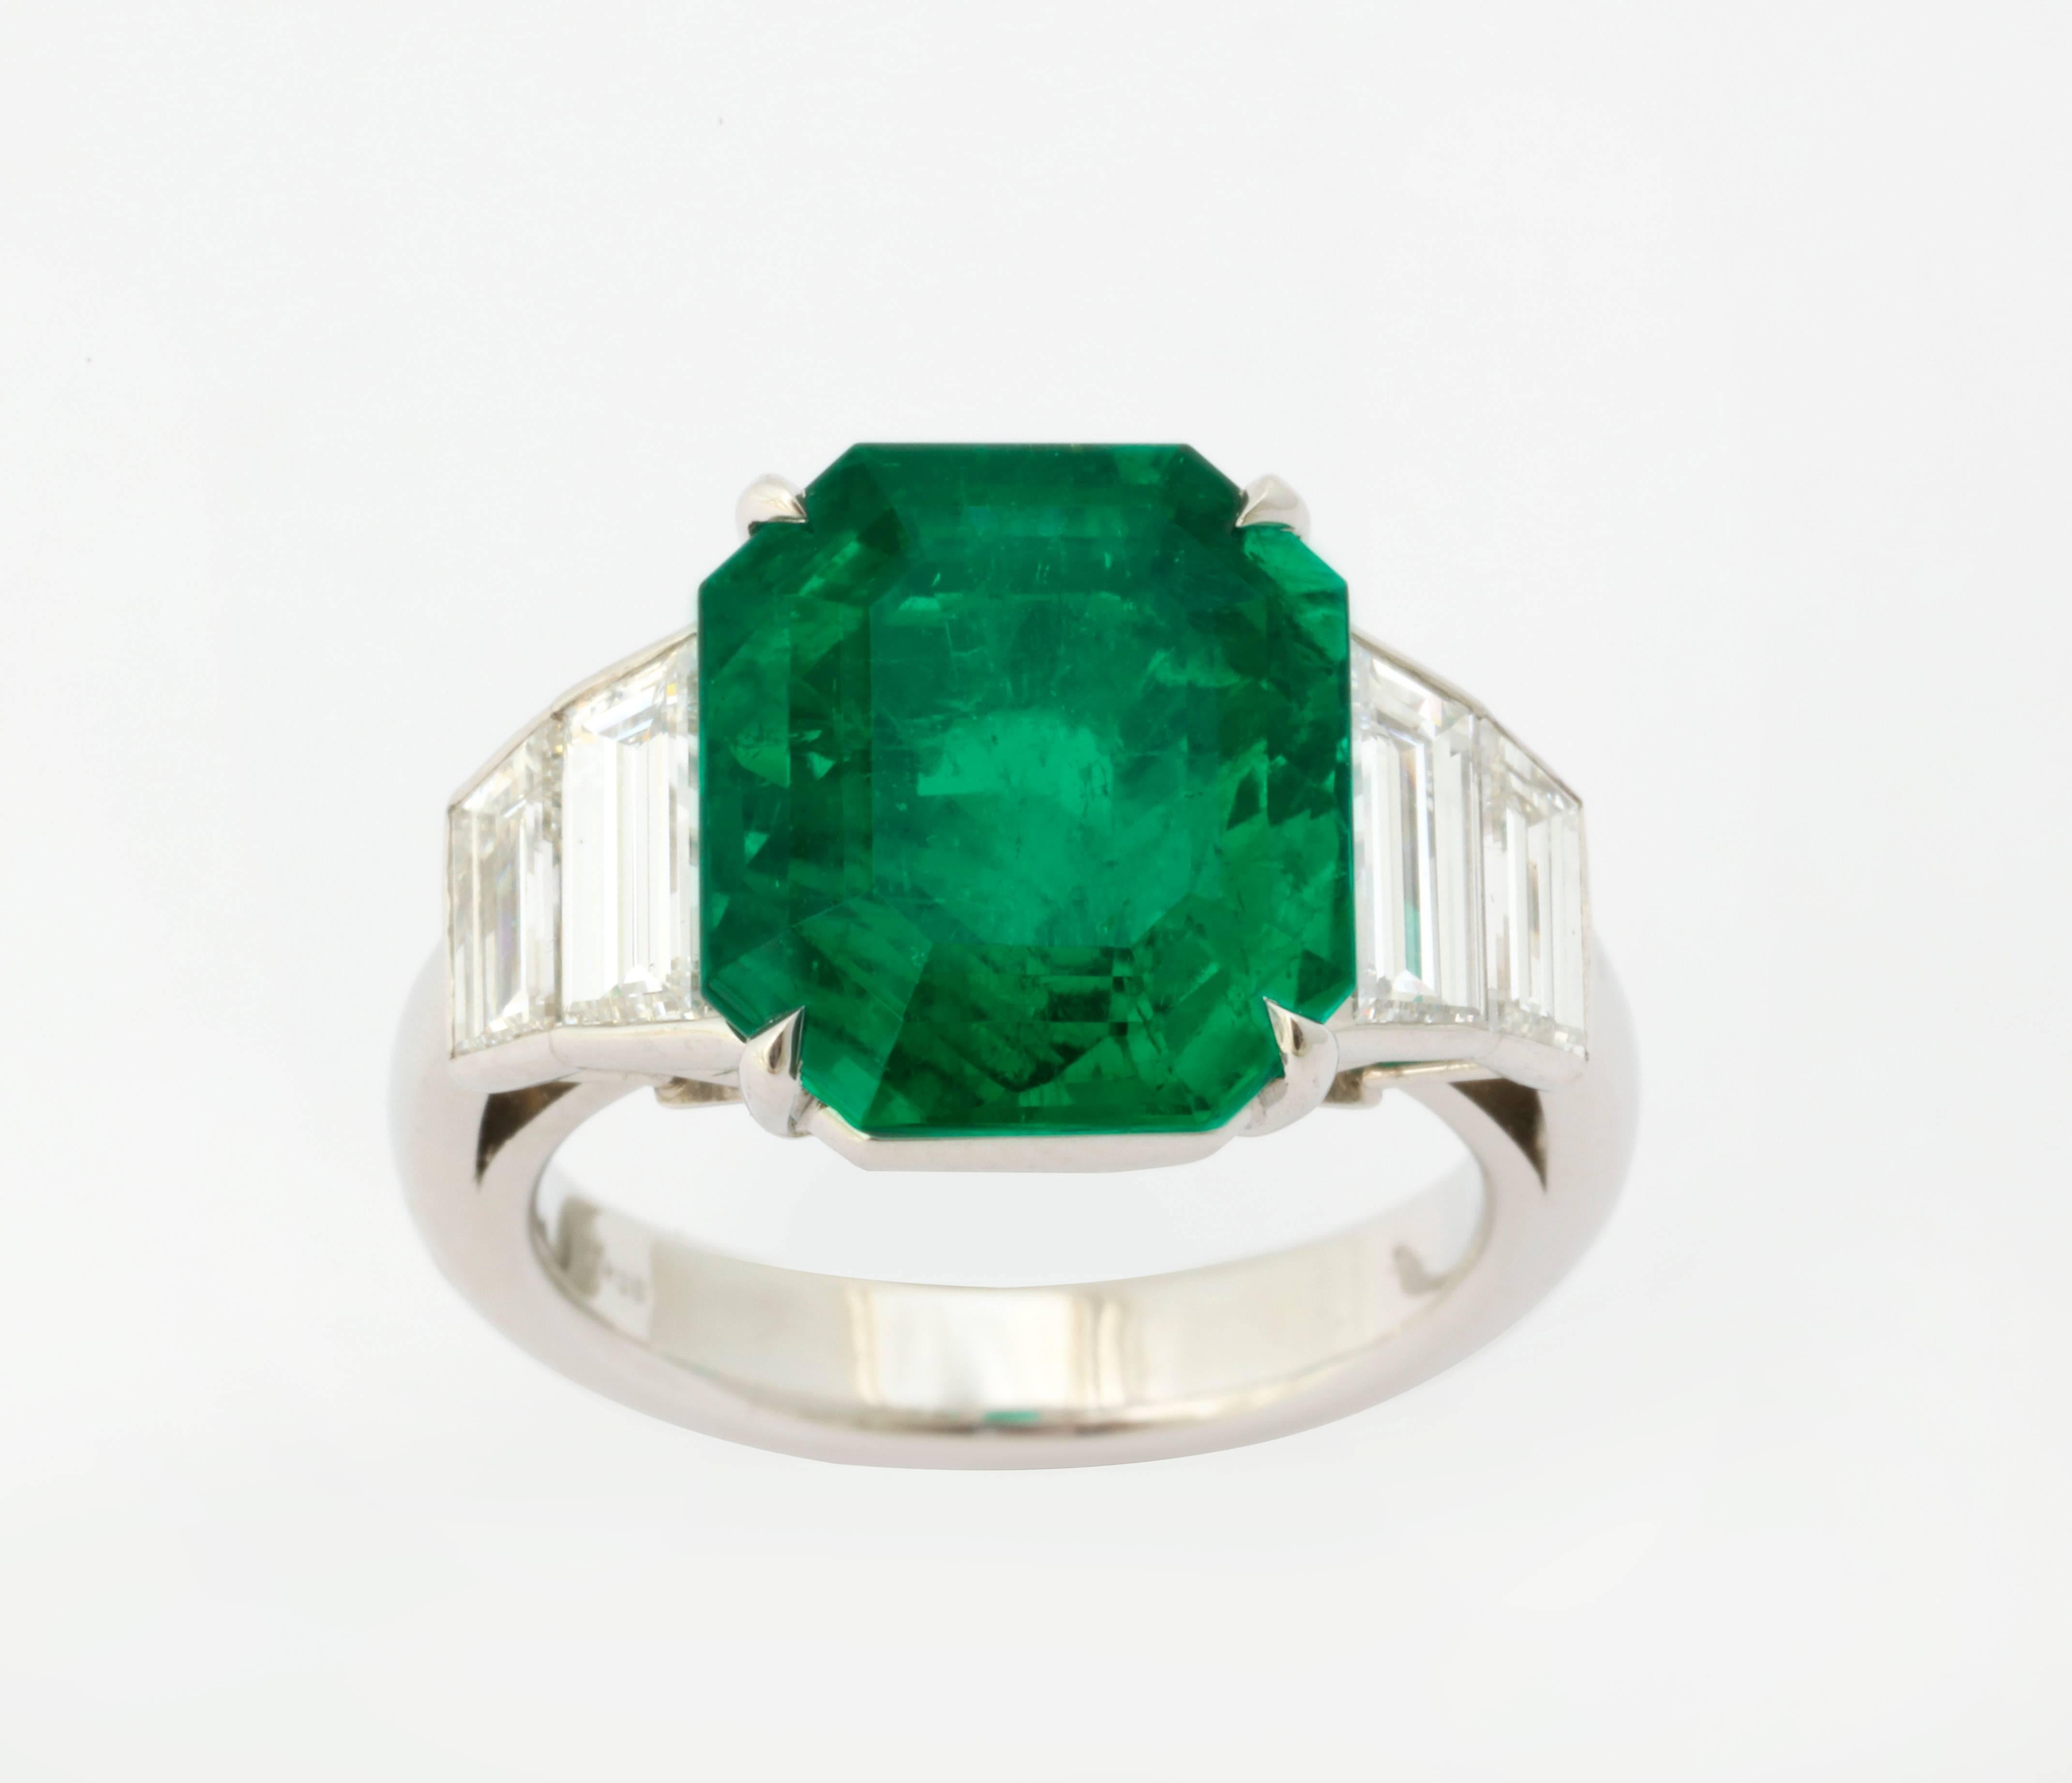 The 6 1/2 carat emerald (6.52cts) is a very elegant cut cornered emerald cut shape.  In a colored stone, this is shape is highly sought after, and rarely found- similar to asscher cut diamonds.  The very fine stone is boldly mounted in platinum with